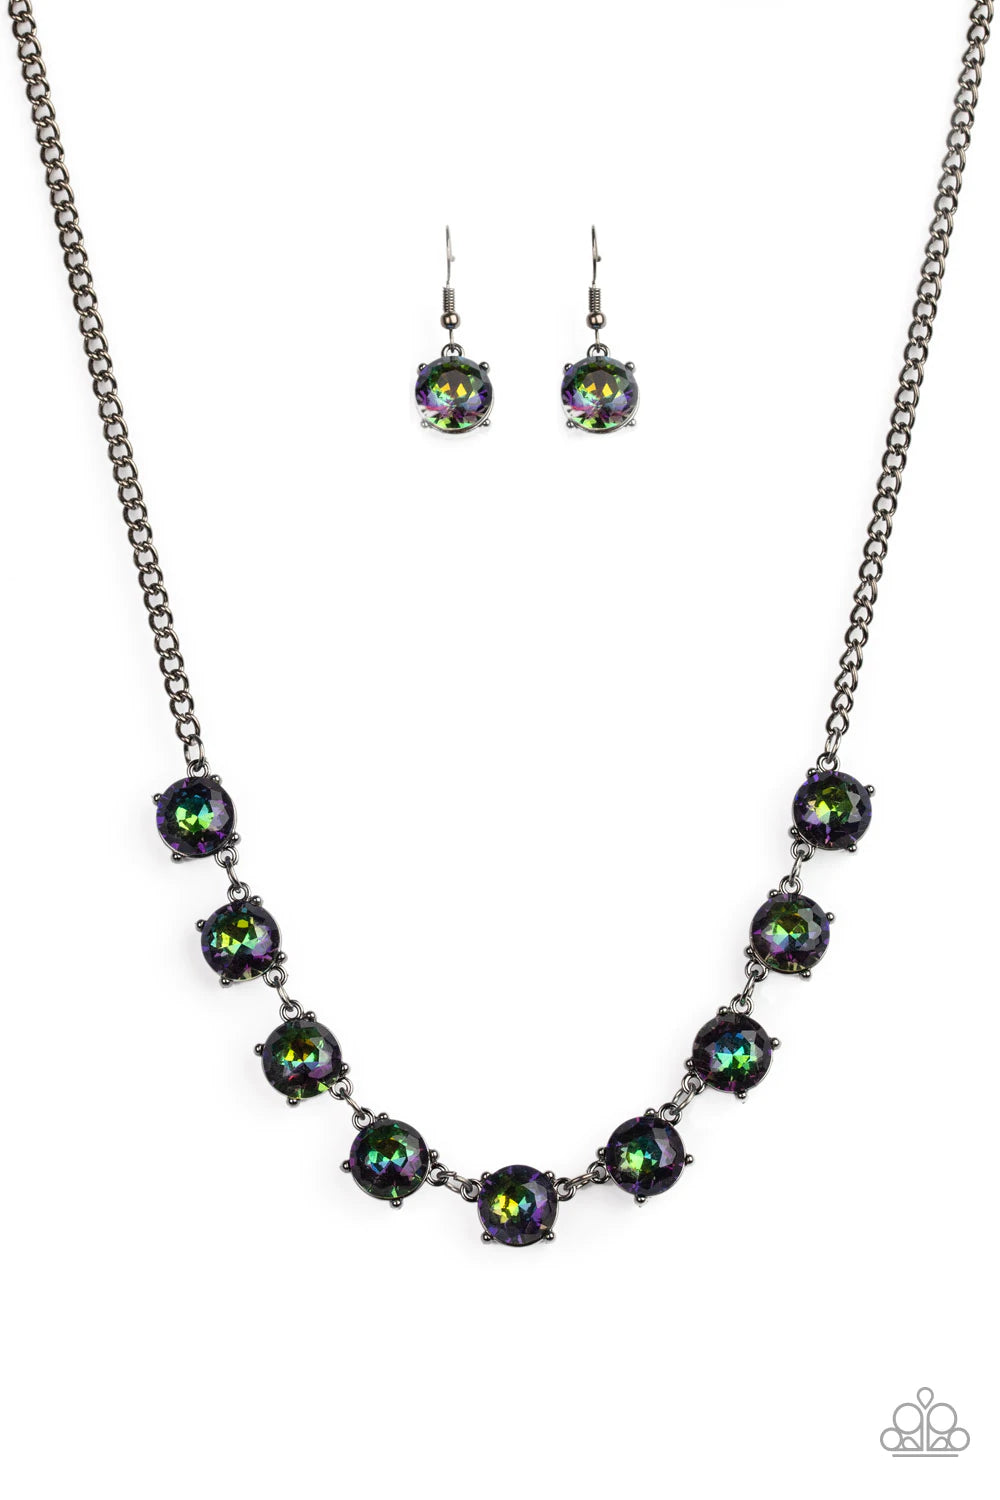 Paparazzi Iridescent Icing - Multi Necklace - Black Diamond Life of the Party Exclusive - A Finishing Touch Jewelry